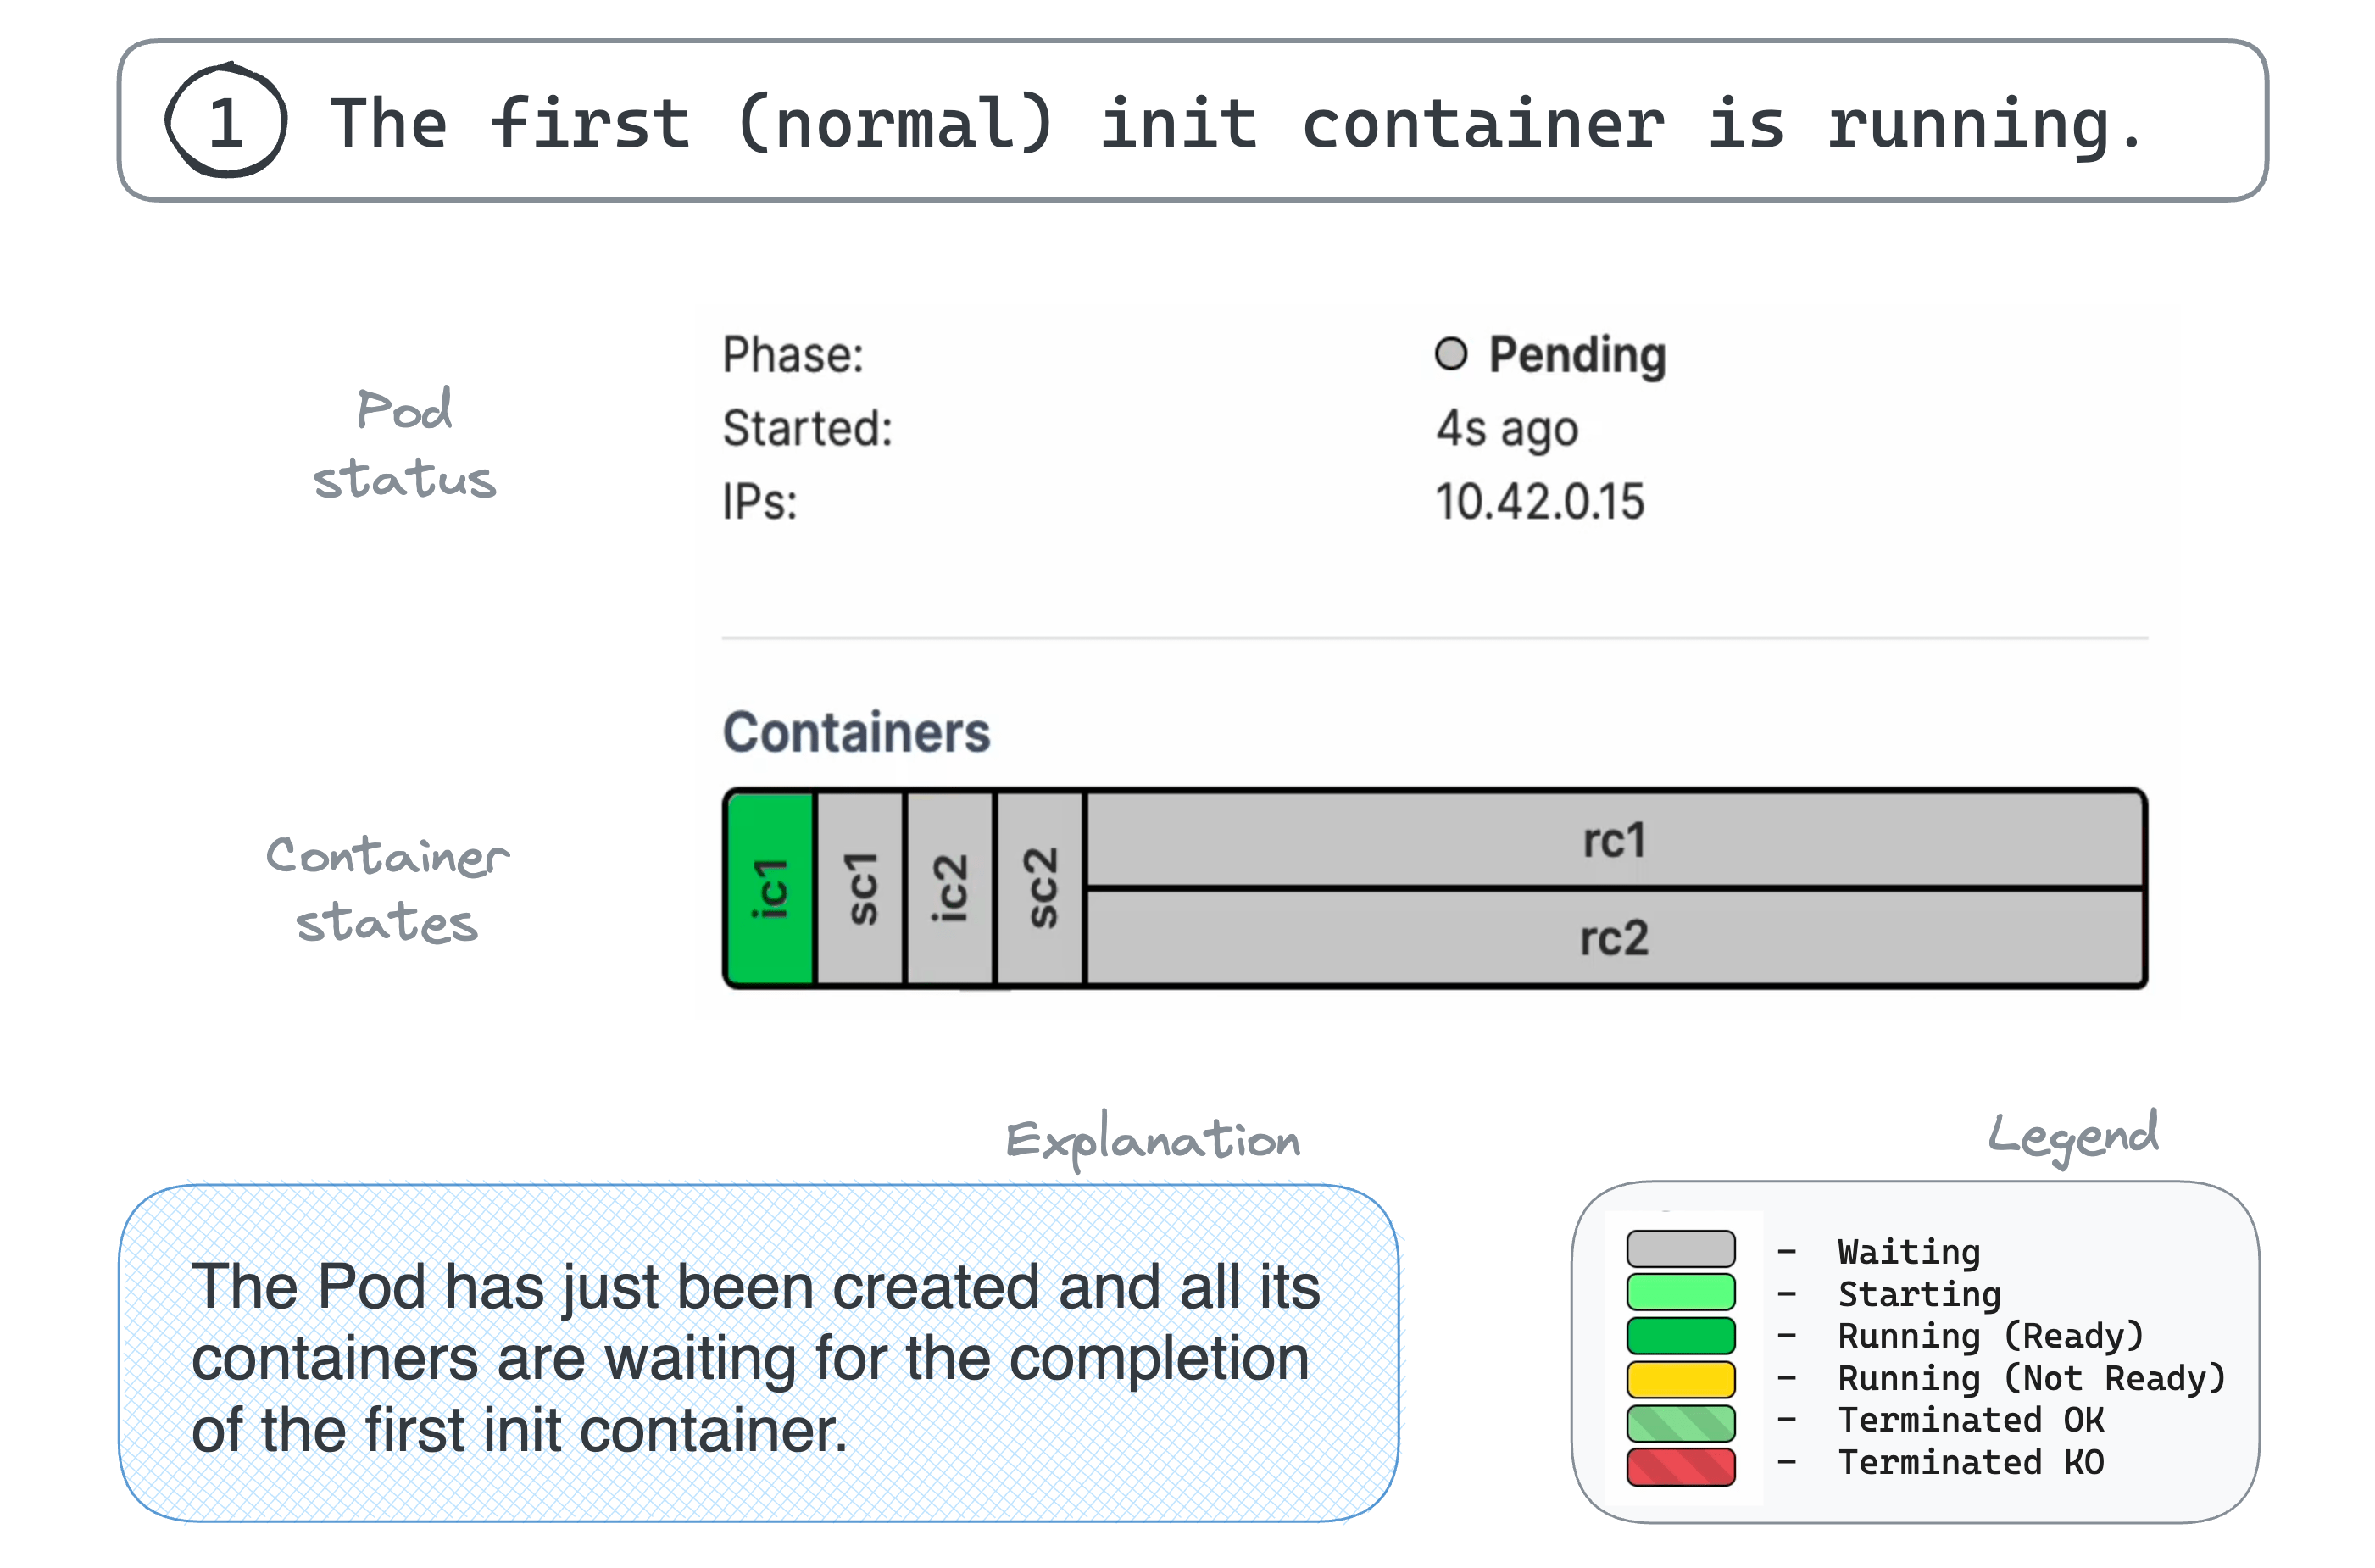 1. The first (normal) init container is running.